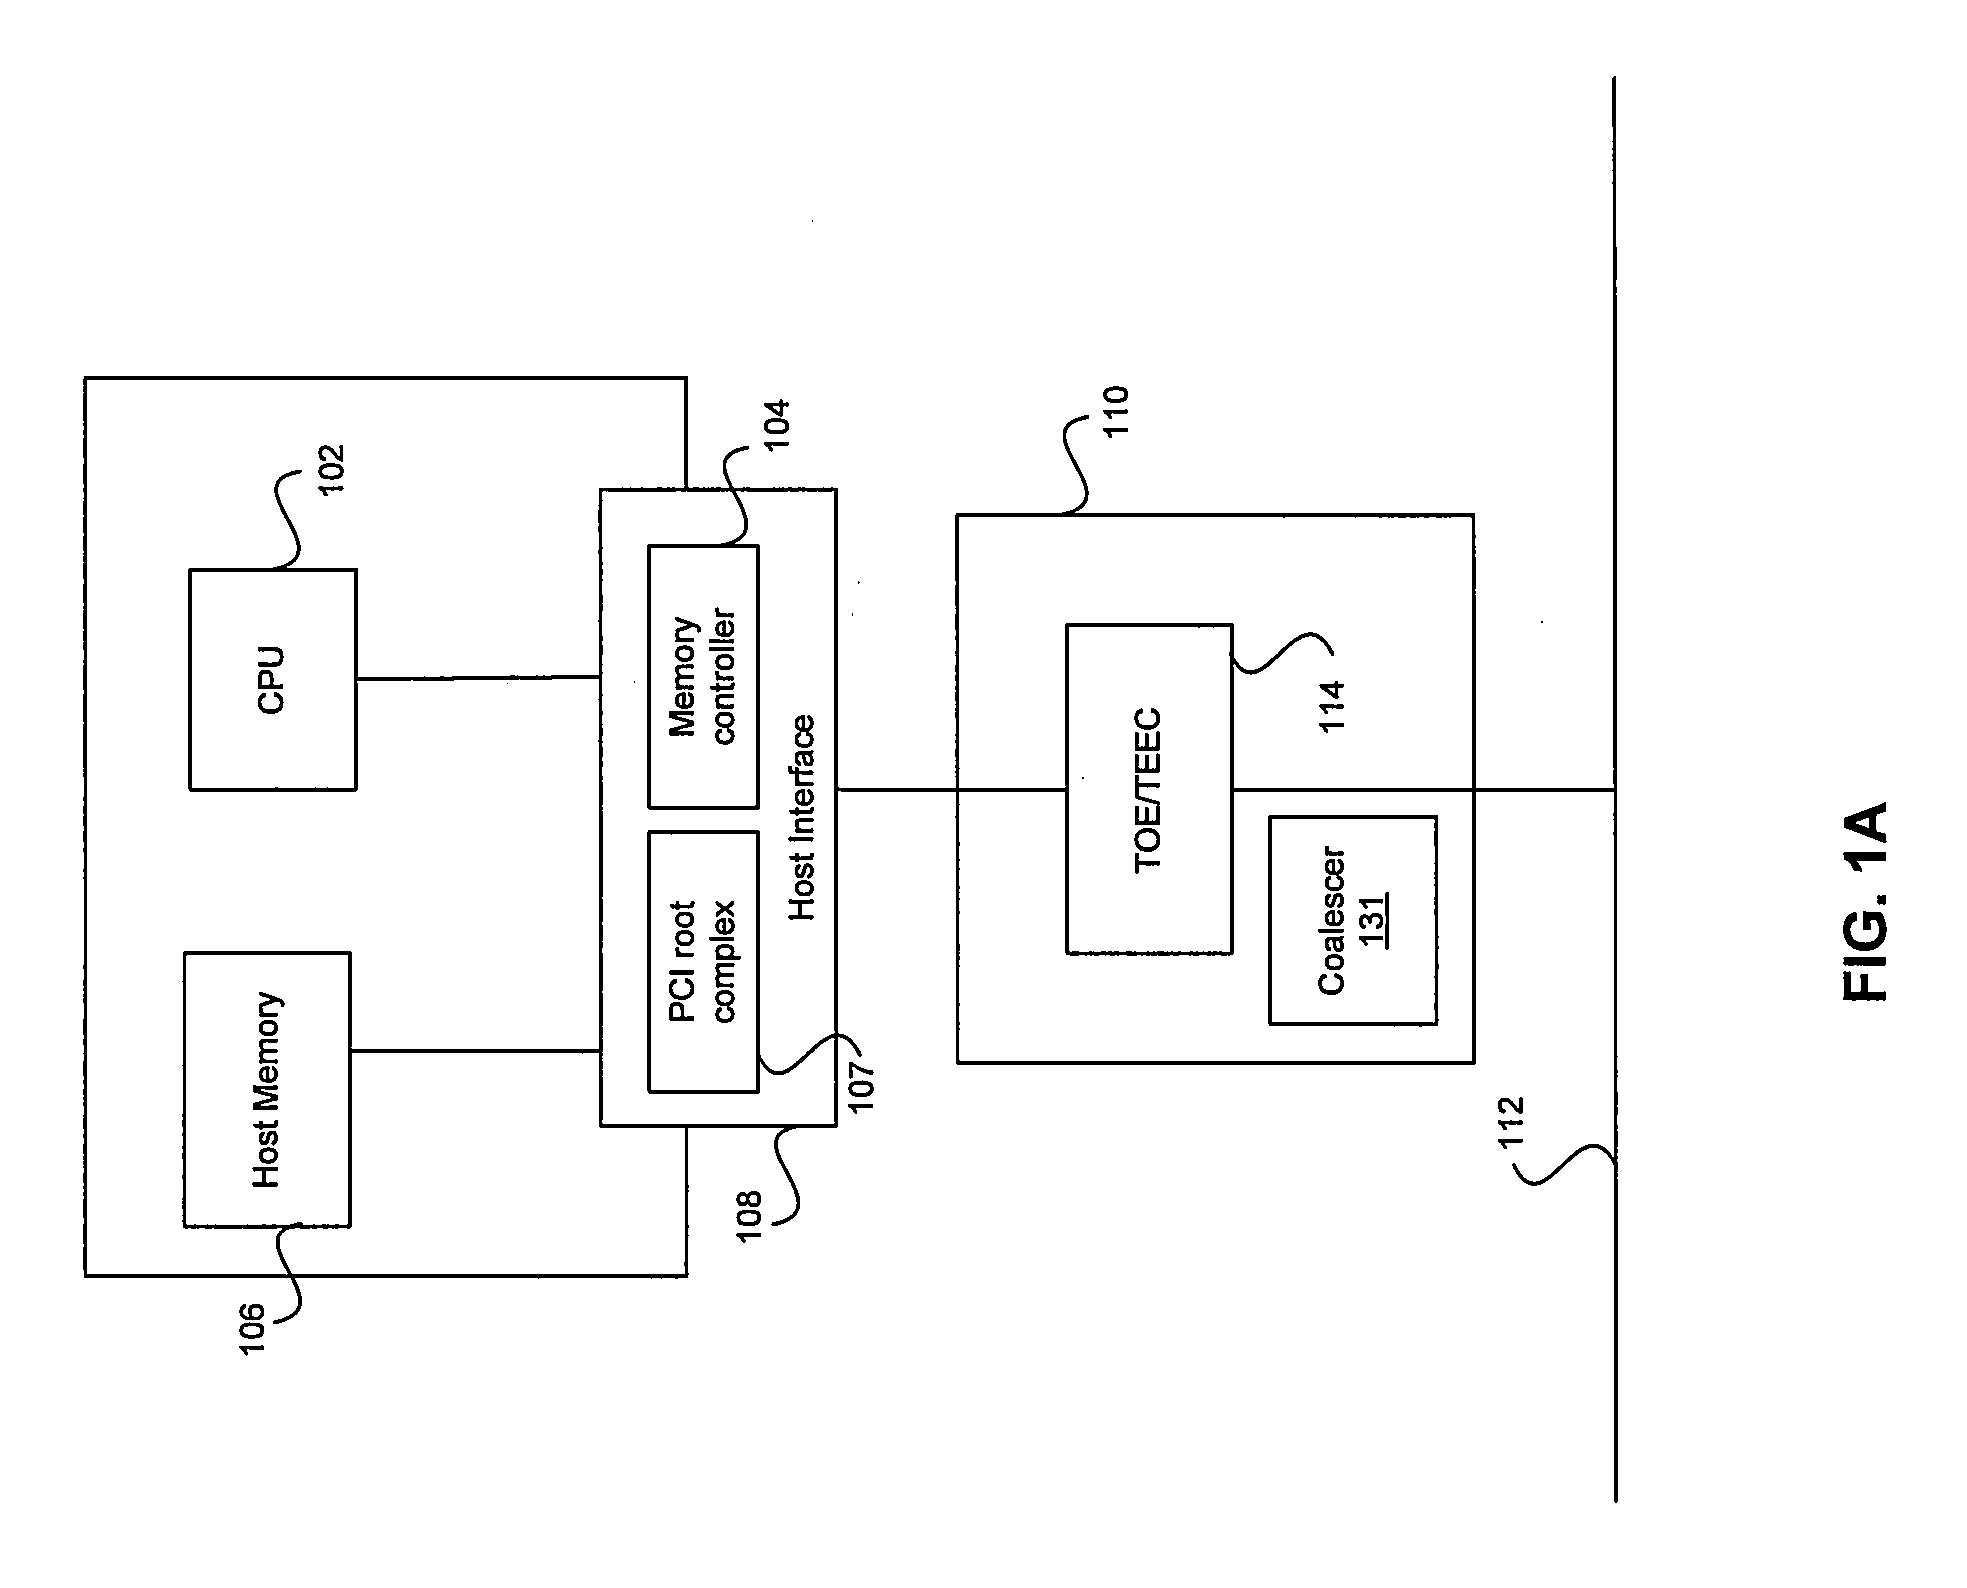 Method and System for Delayed Completion Coalescing